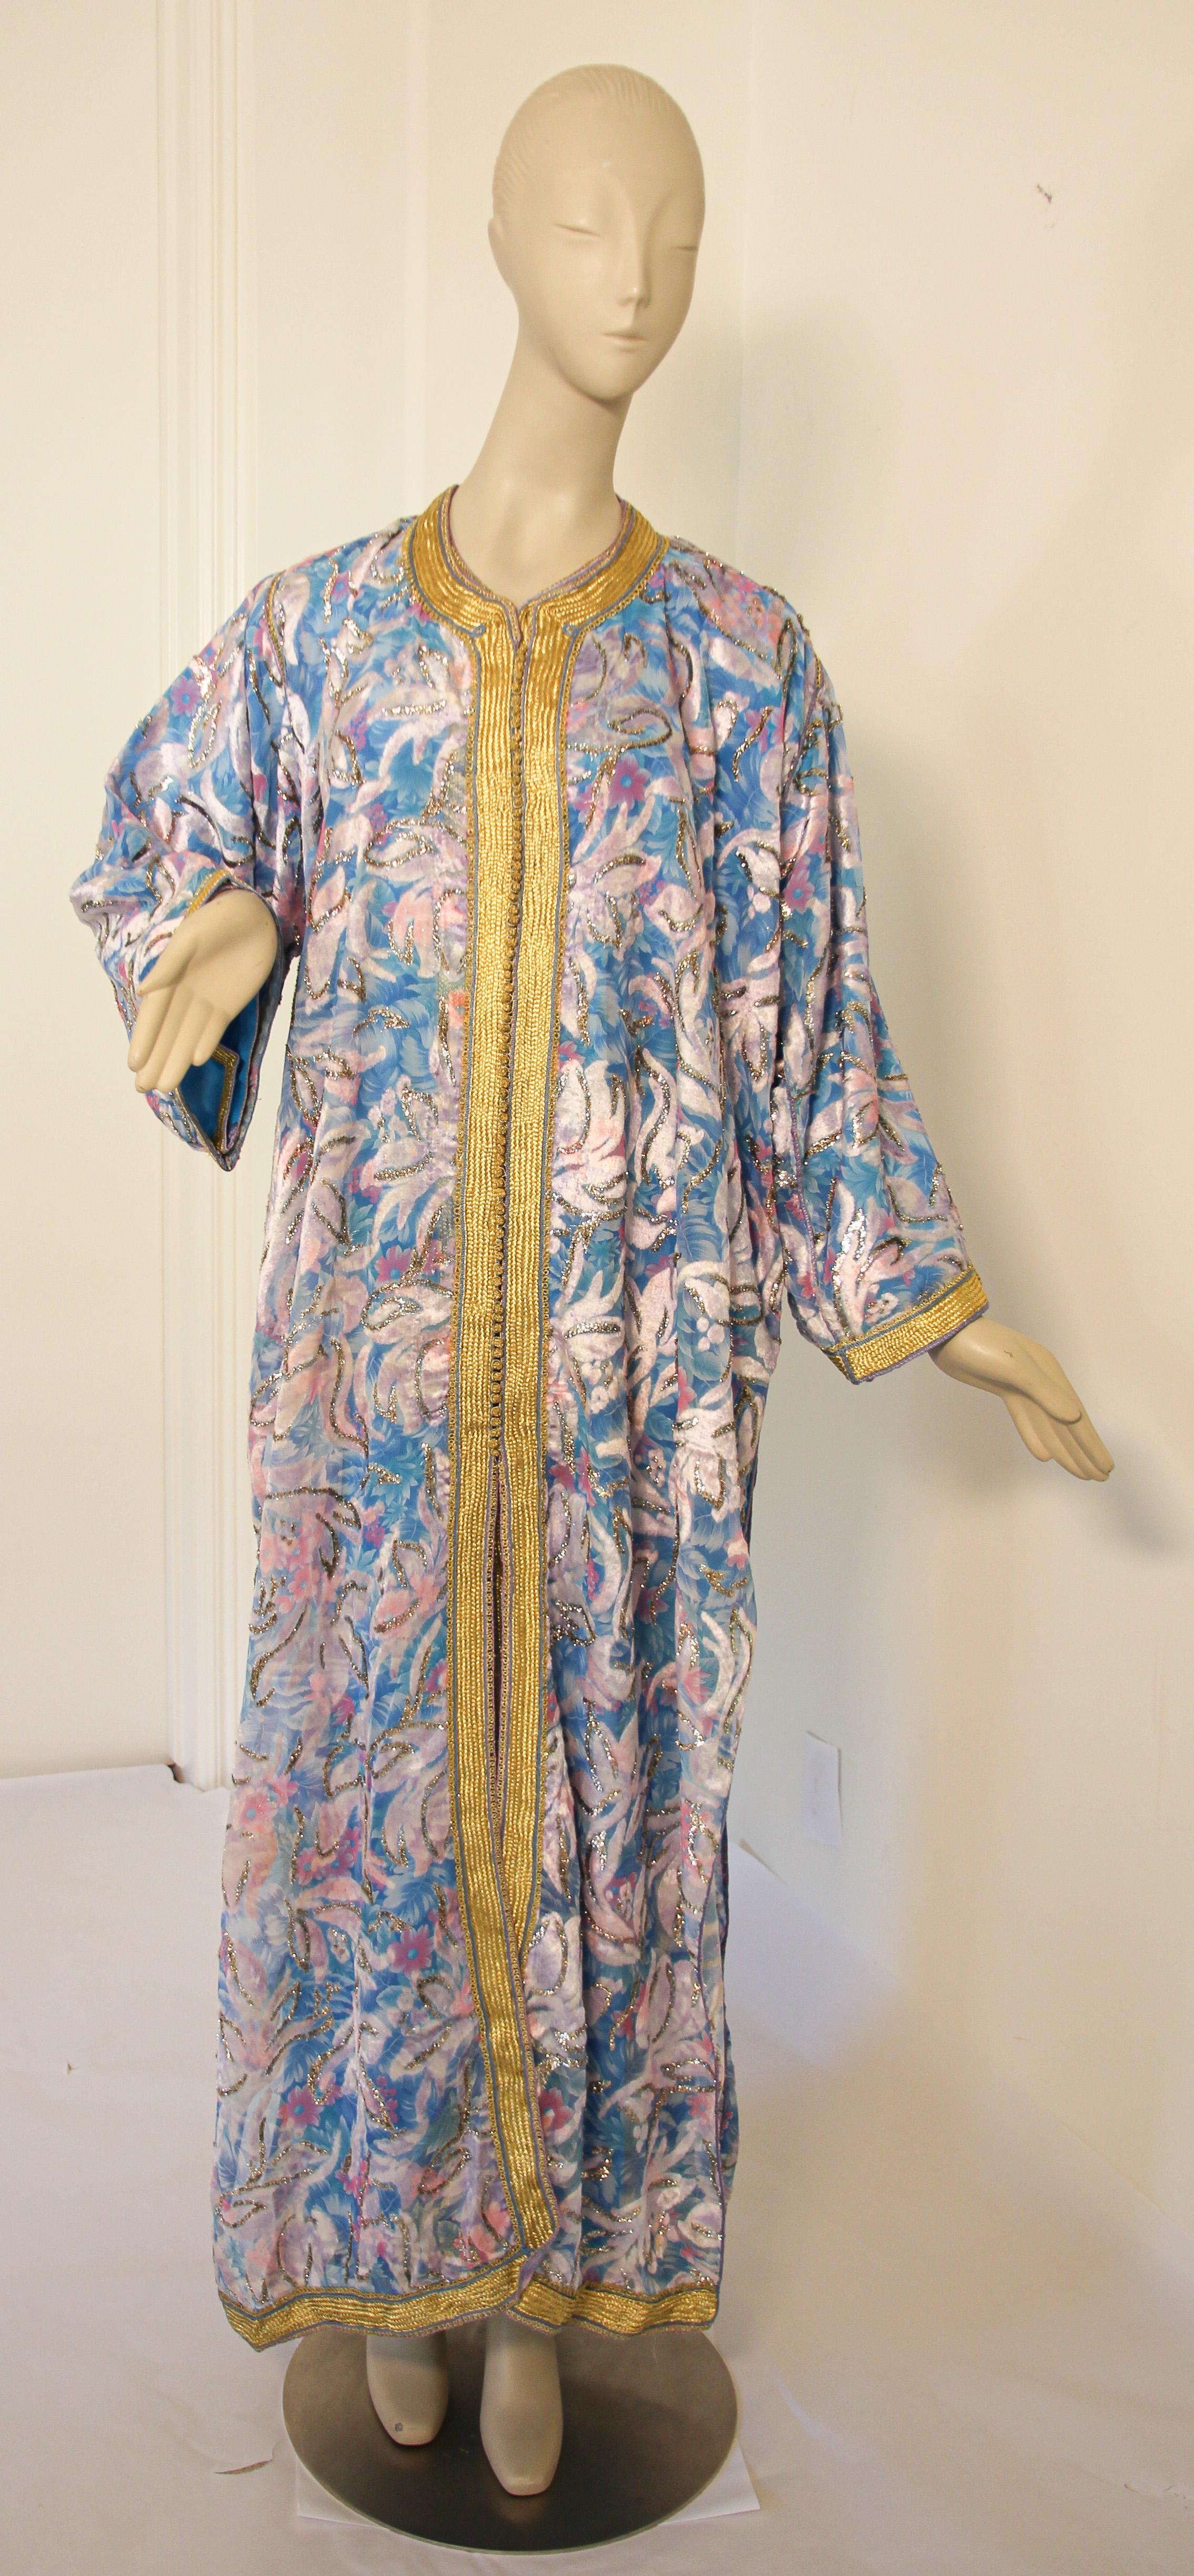 Elegant Moroccan caftan in turquoise and gold floral lame metallic and embroidered trim,
circa 1970s.
This long maxi dress kaftan is embroidered and embellished entirely by hand.
It’s crafted in Morocco and tailored for a relaxed fit.
One of a kind